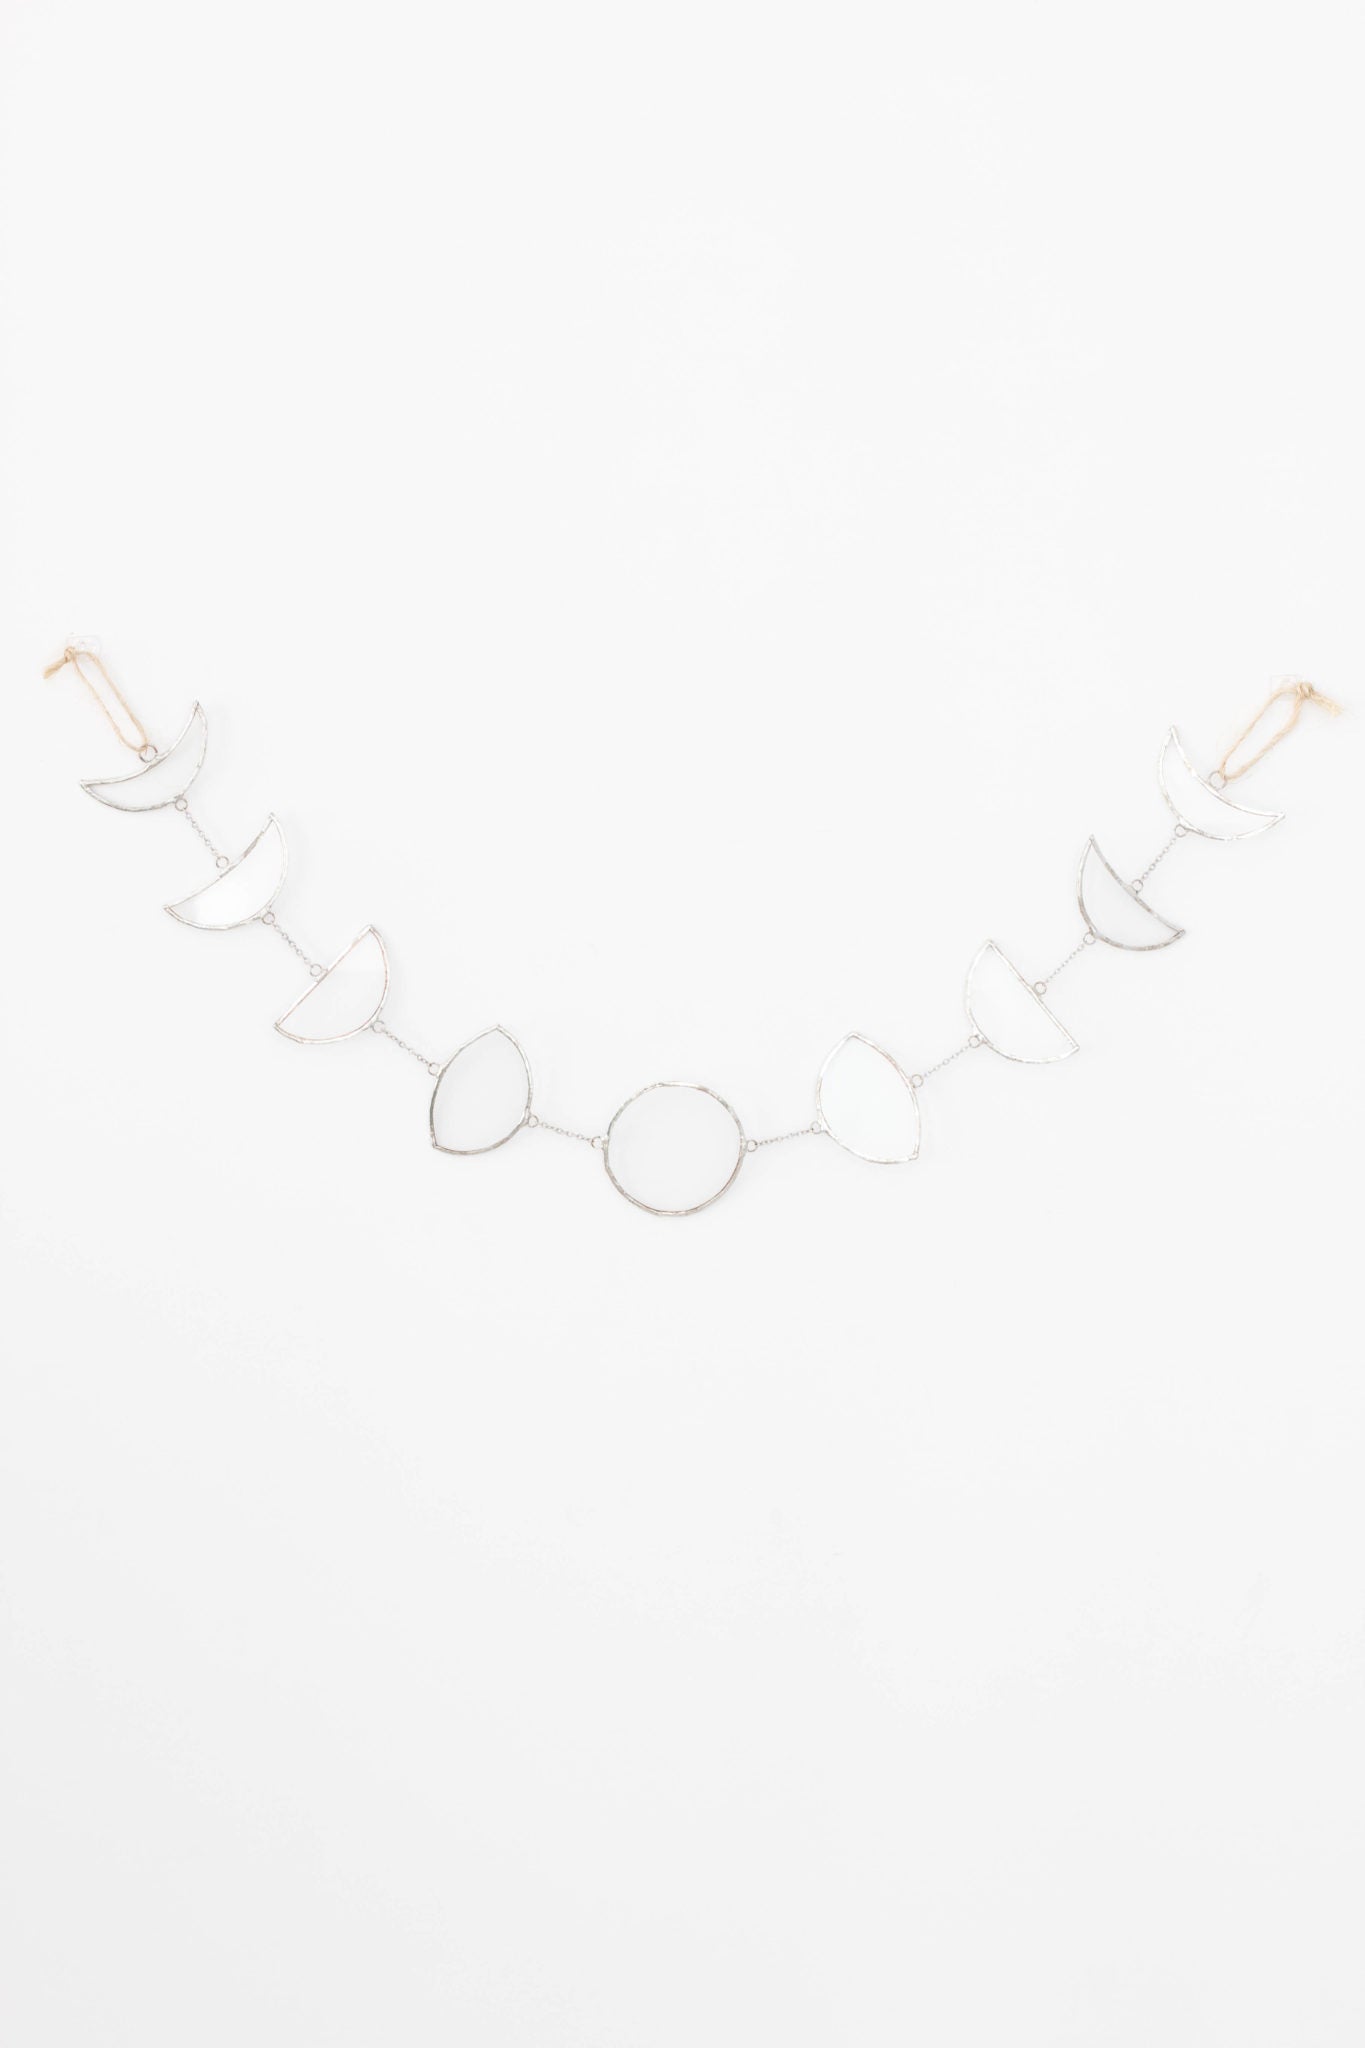 Bright Side of the Moon Phase Garland